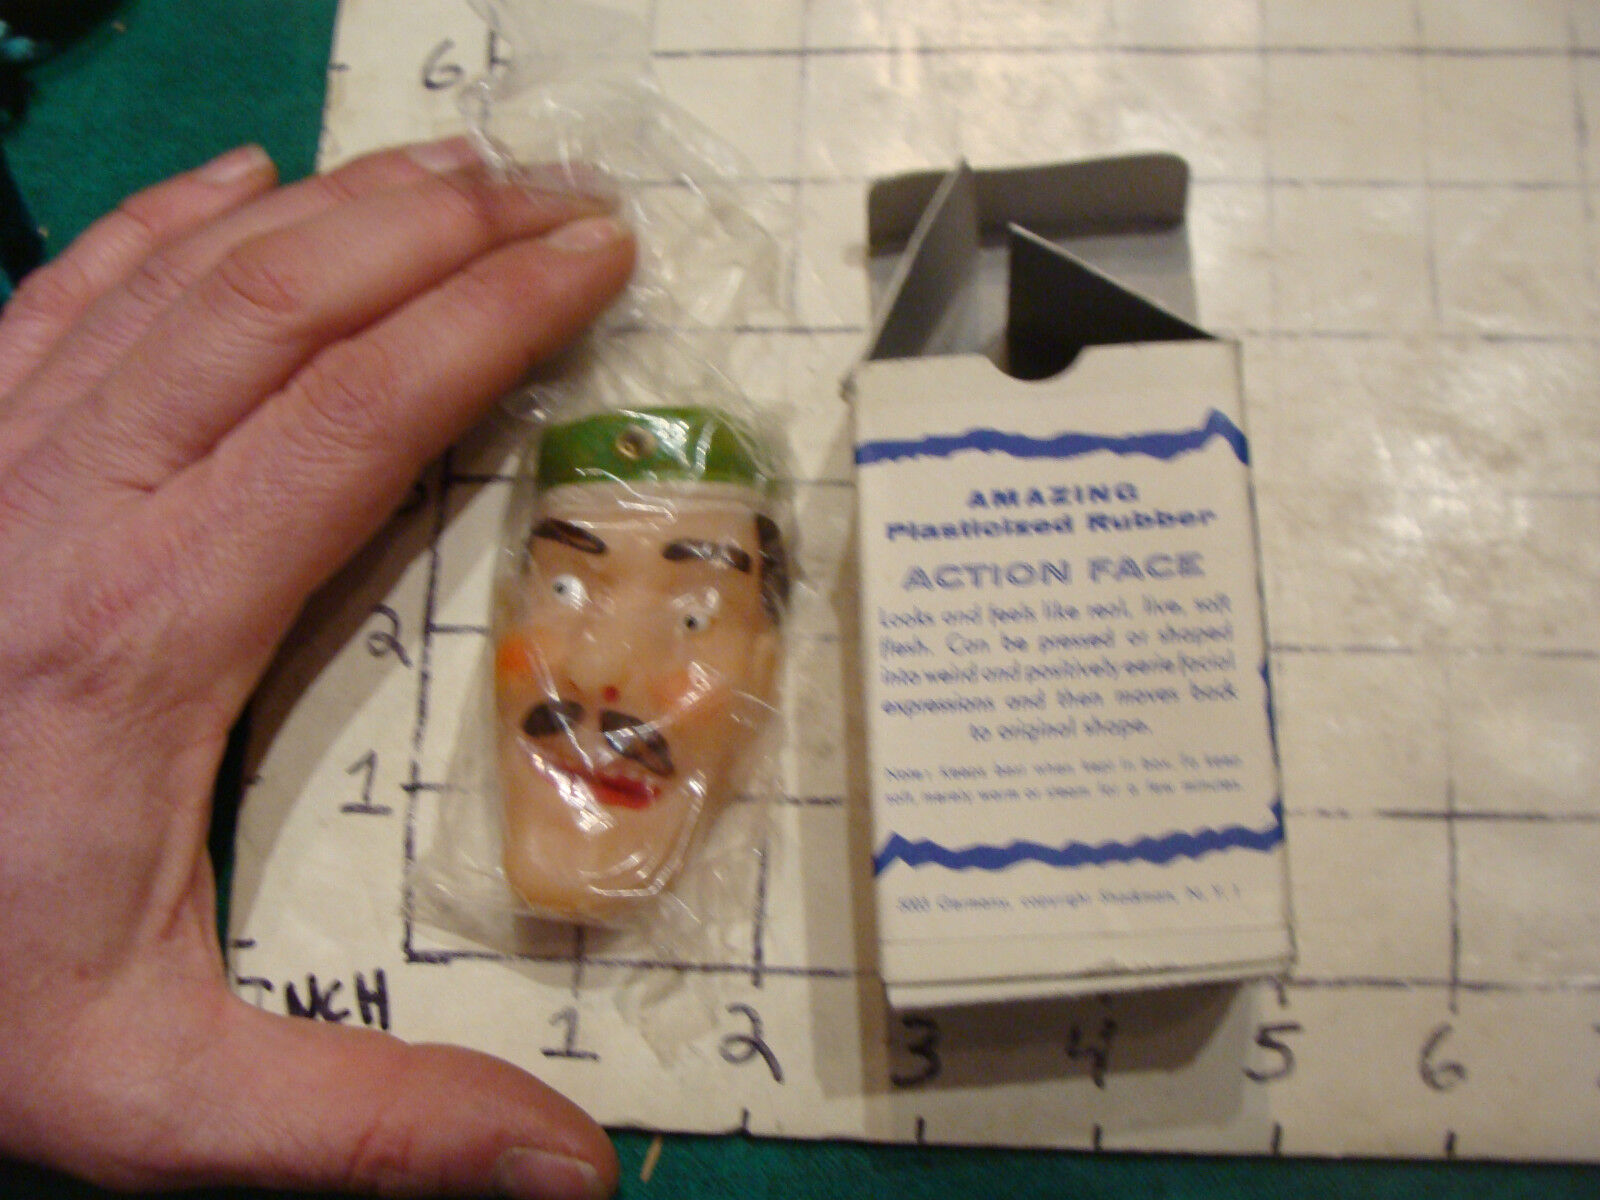 VINTAGE clean UNUSED--AMAZING PLASTICIZED RUBBER ACTION FACE in box 1966 hackman